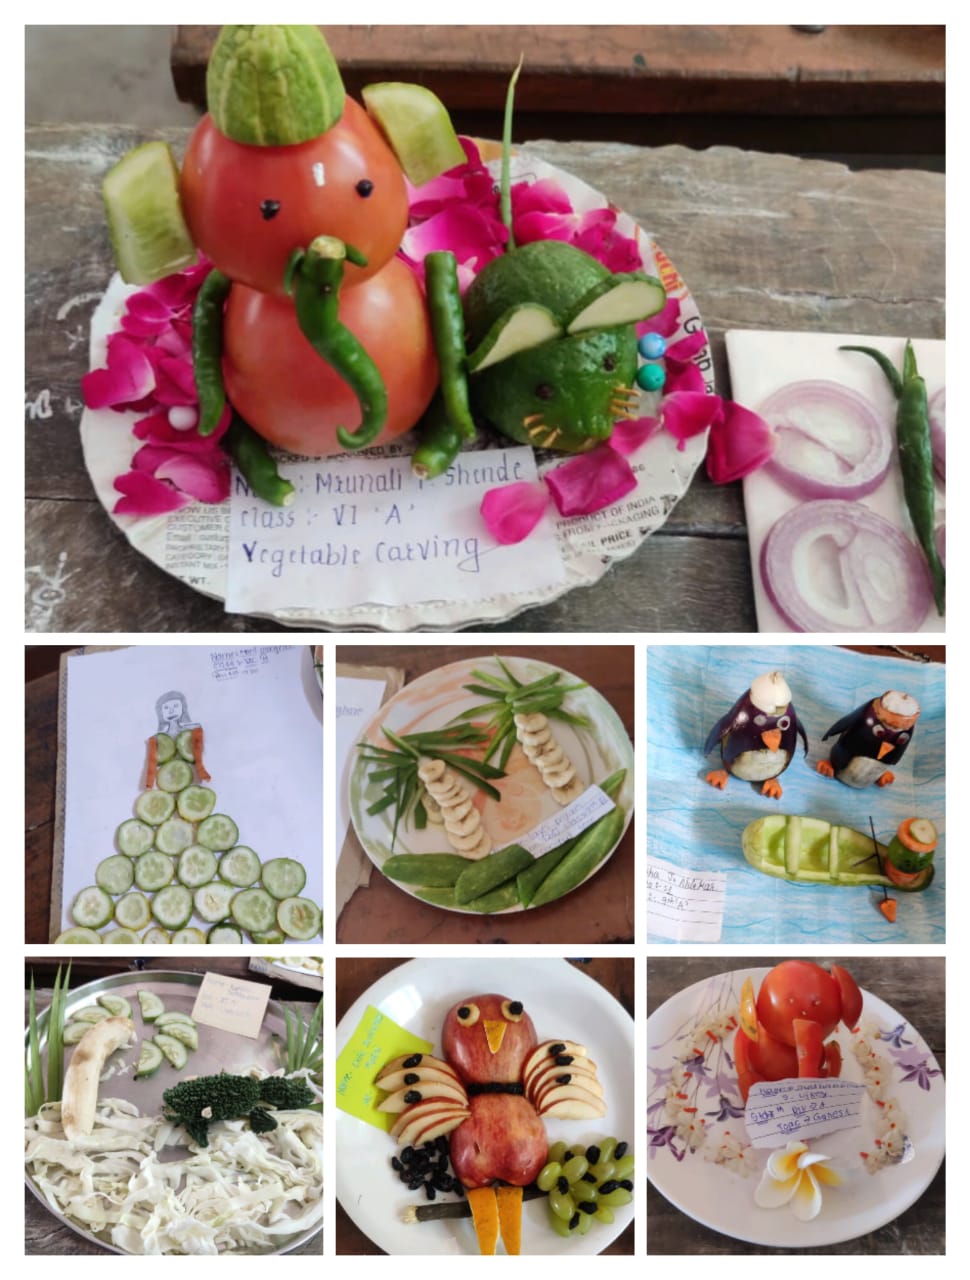 Fruit & veg carving competition